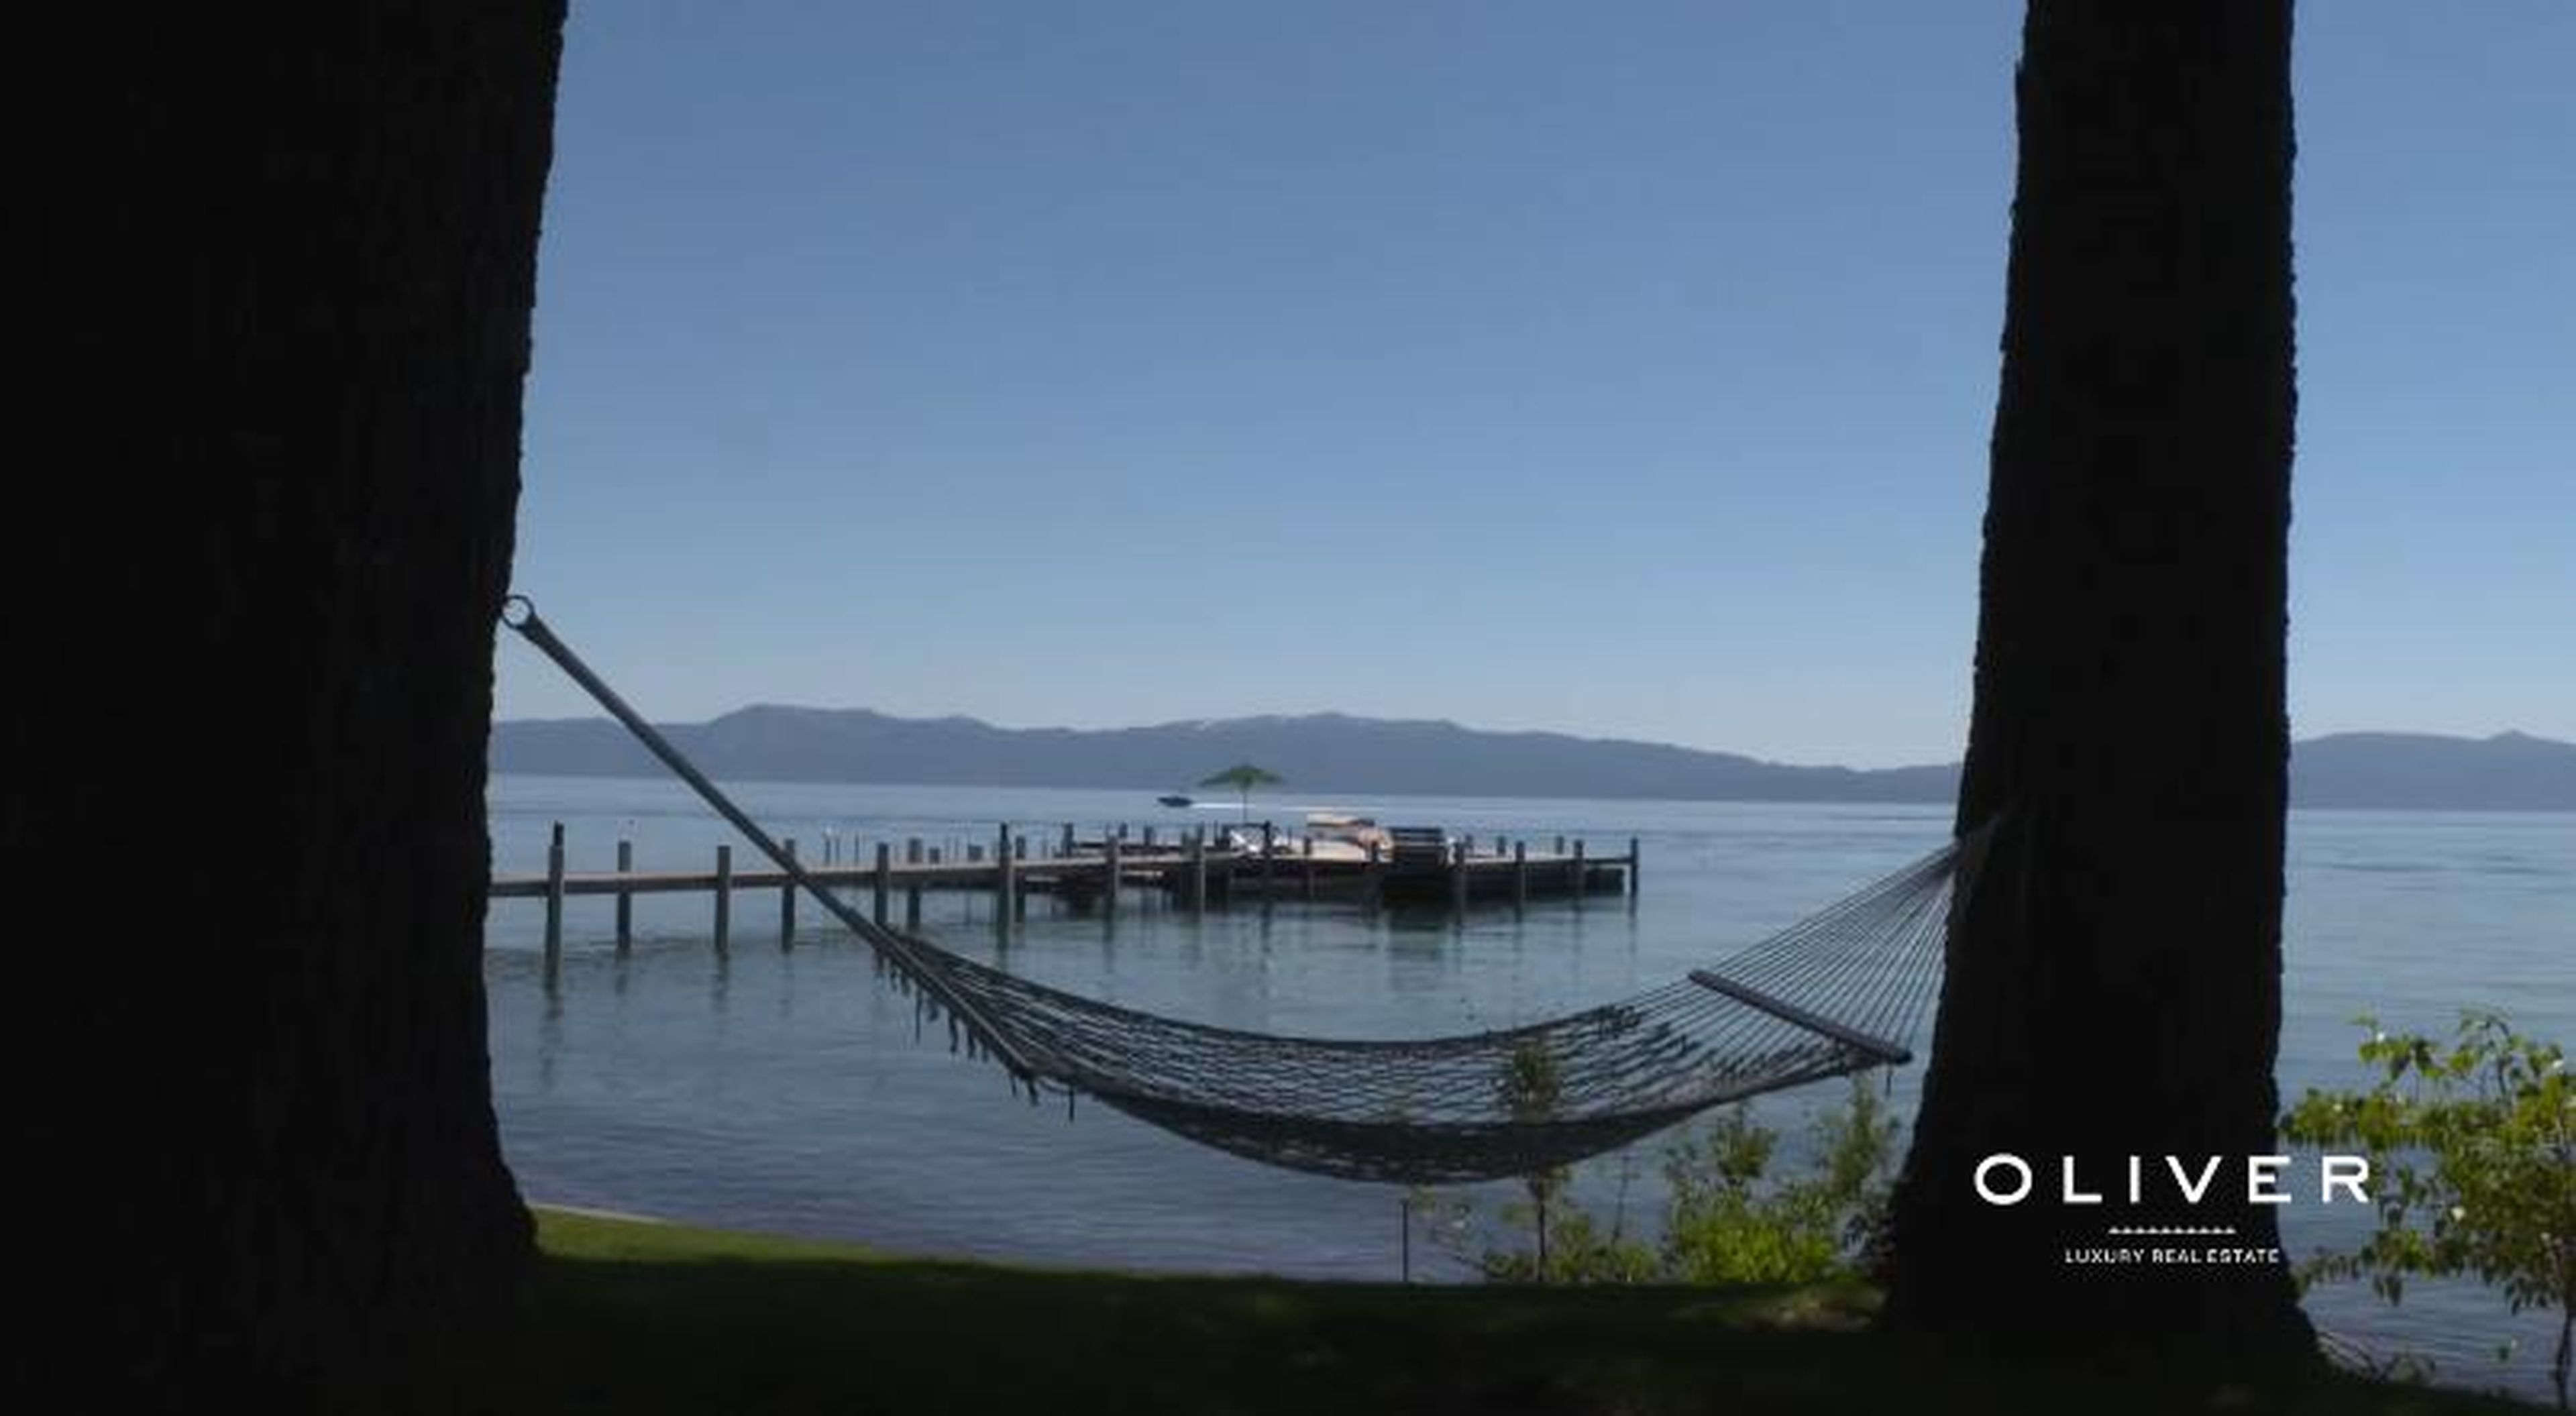 The property includes 200 feet of private waterfront on Lake Tahoe — and, a relaxing hammock for Mark and his wife Priscilla to enjoy.